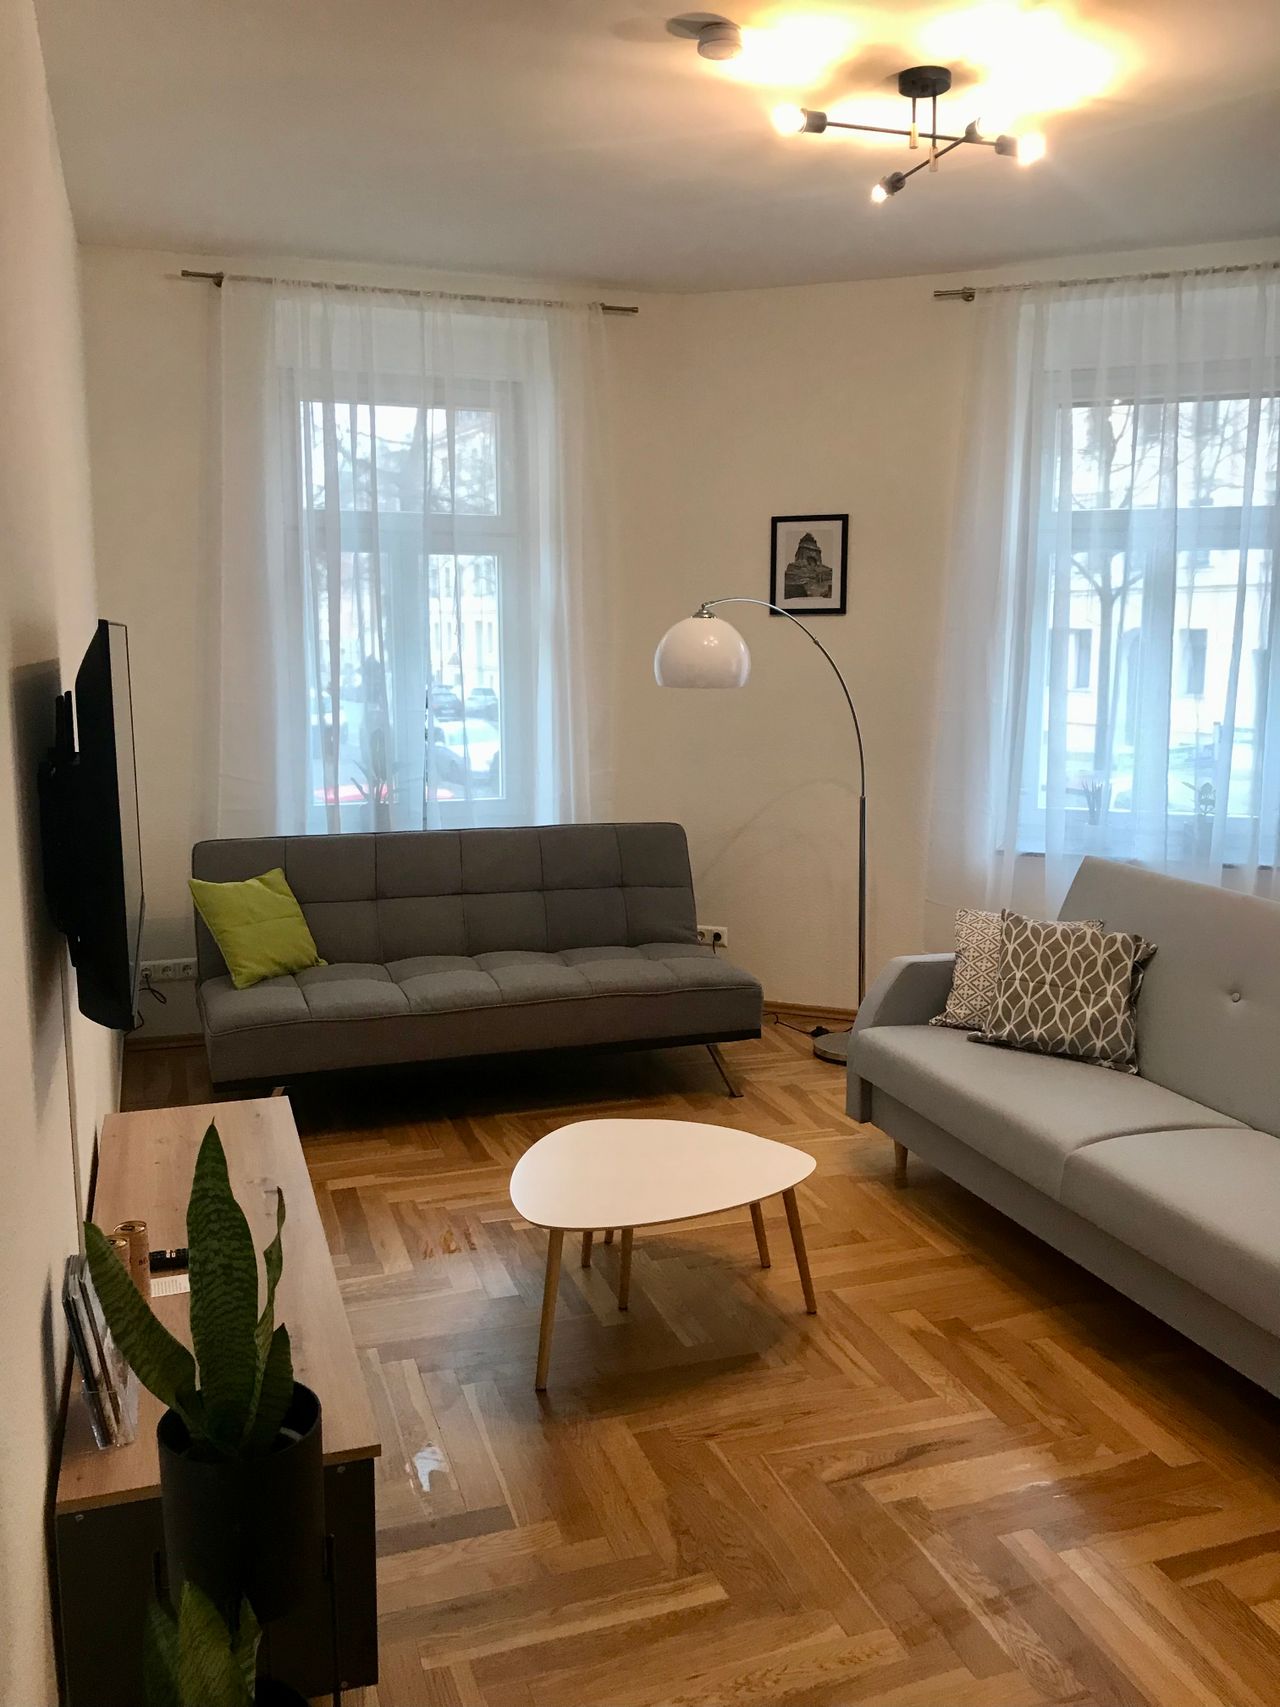 Lovely apartment located in Leipzig